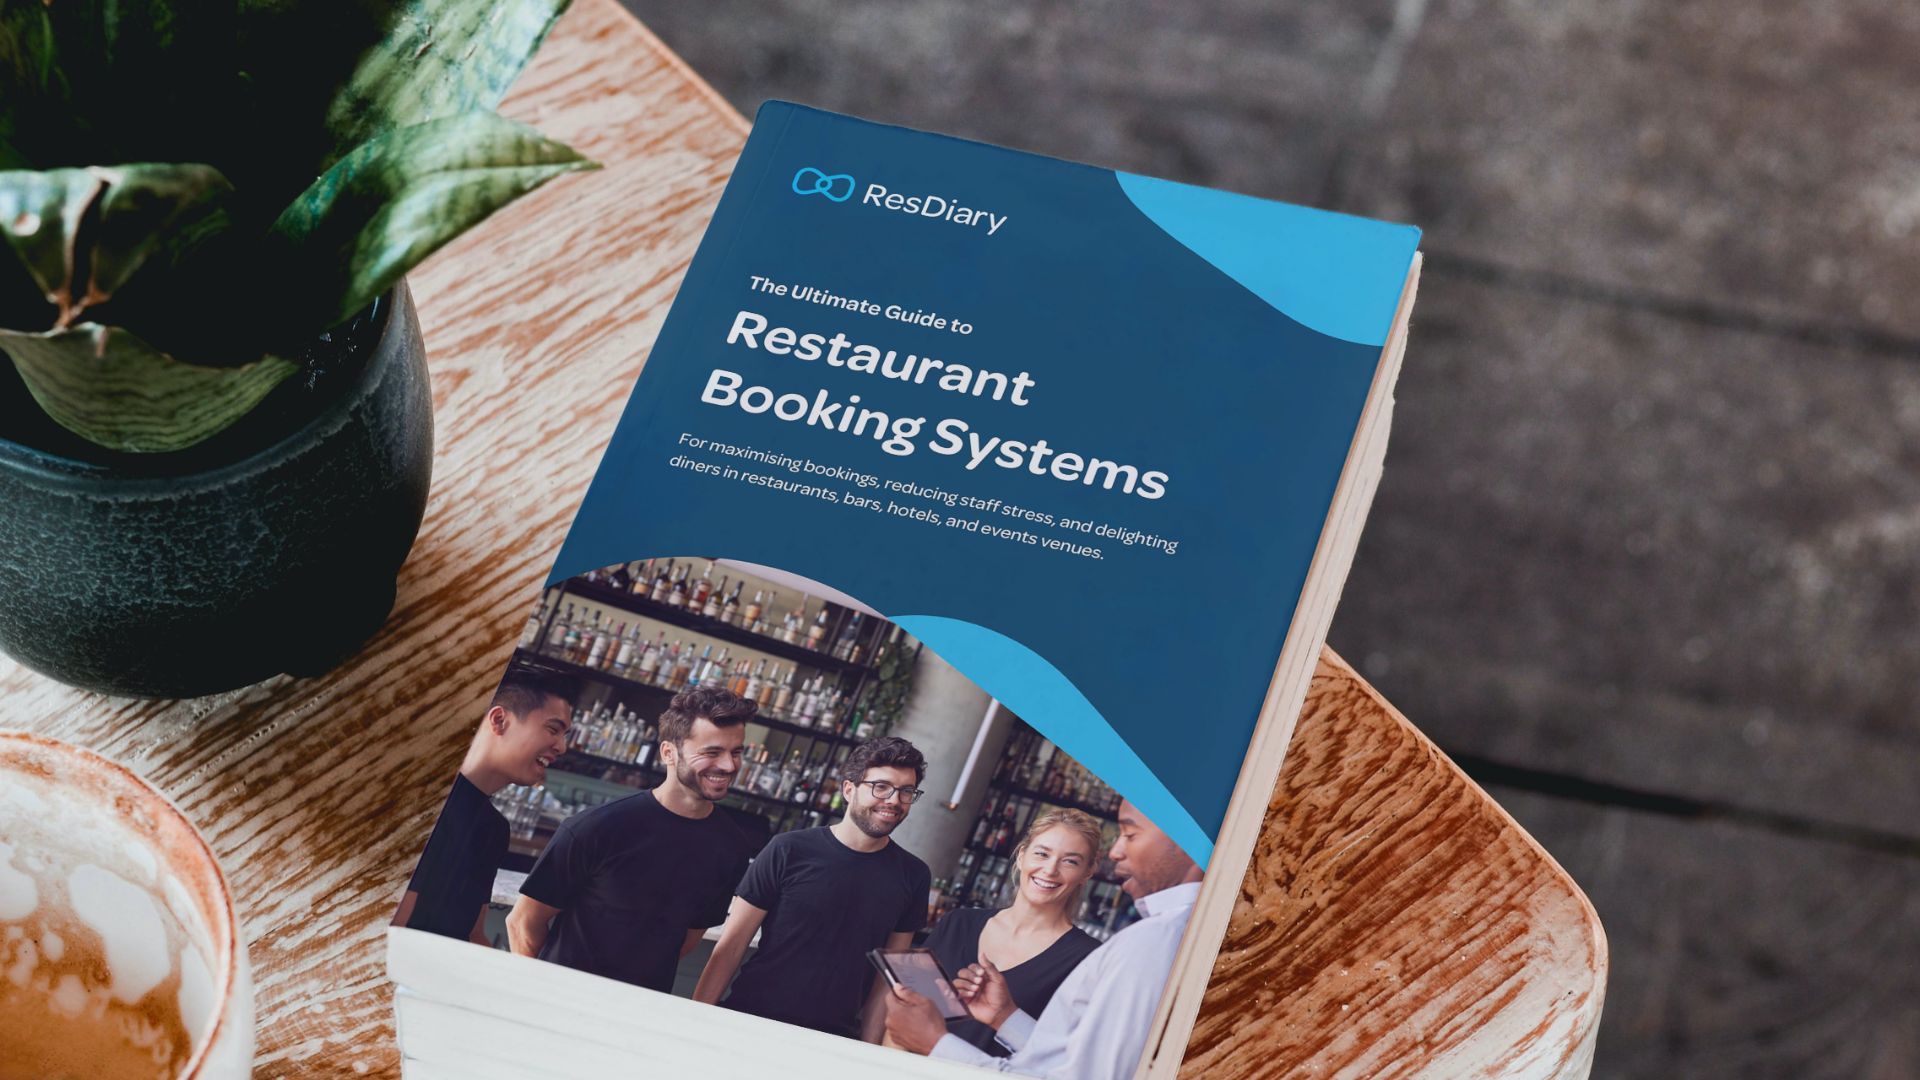 The Ultimate Guide to Restaurant Booking Systems